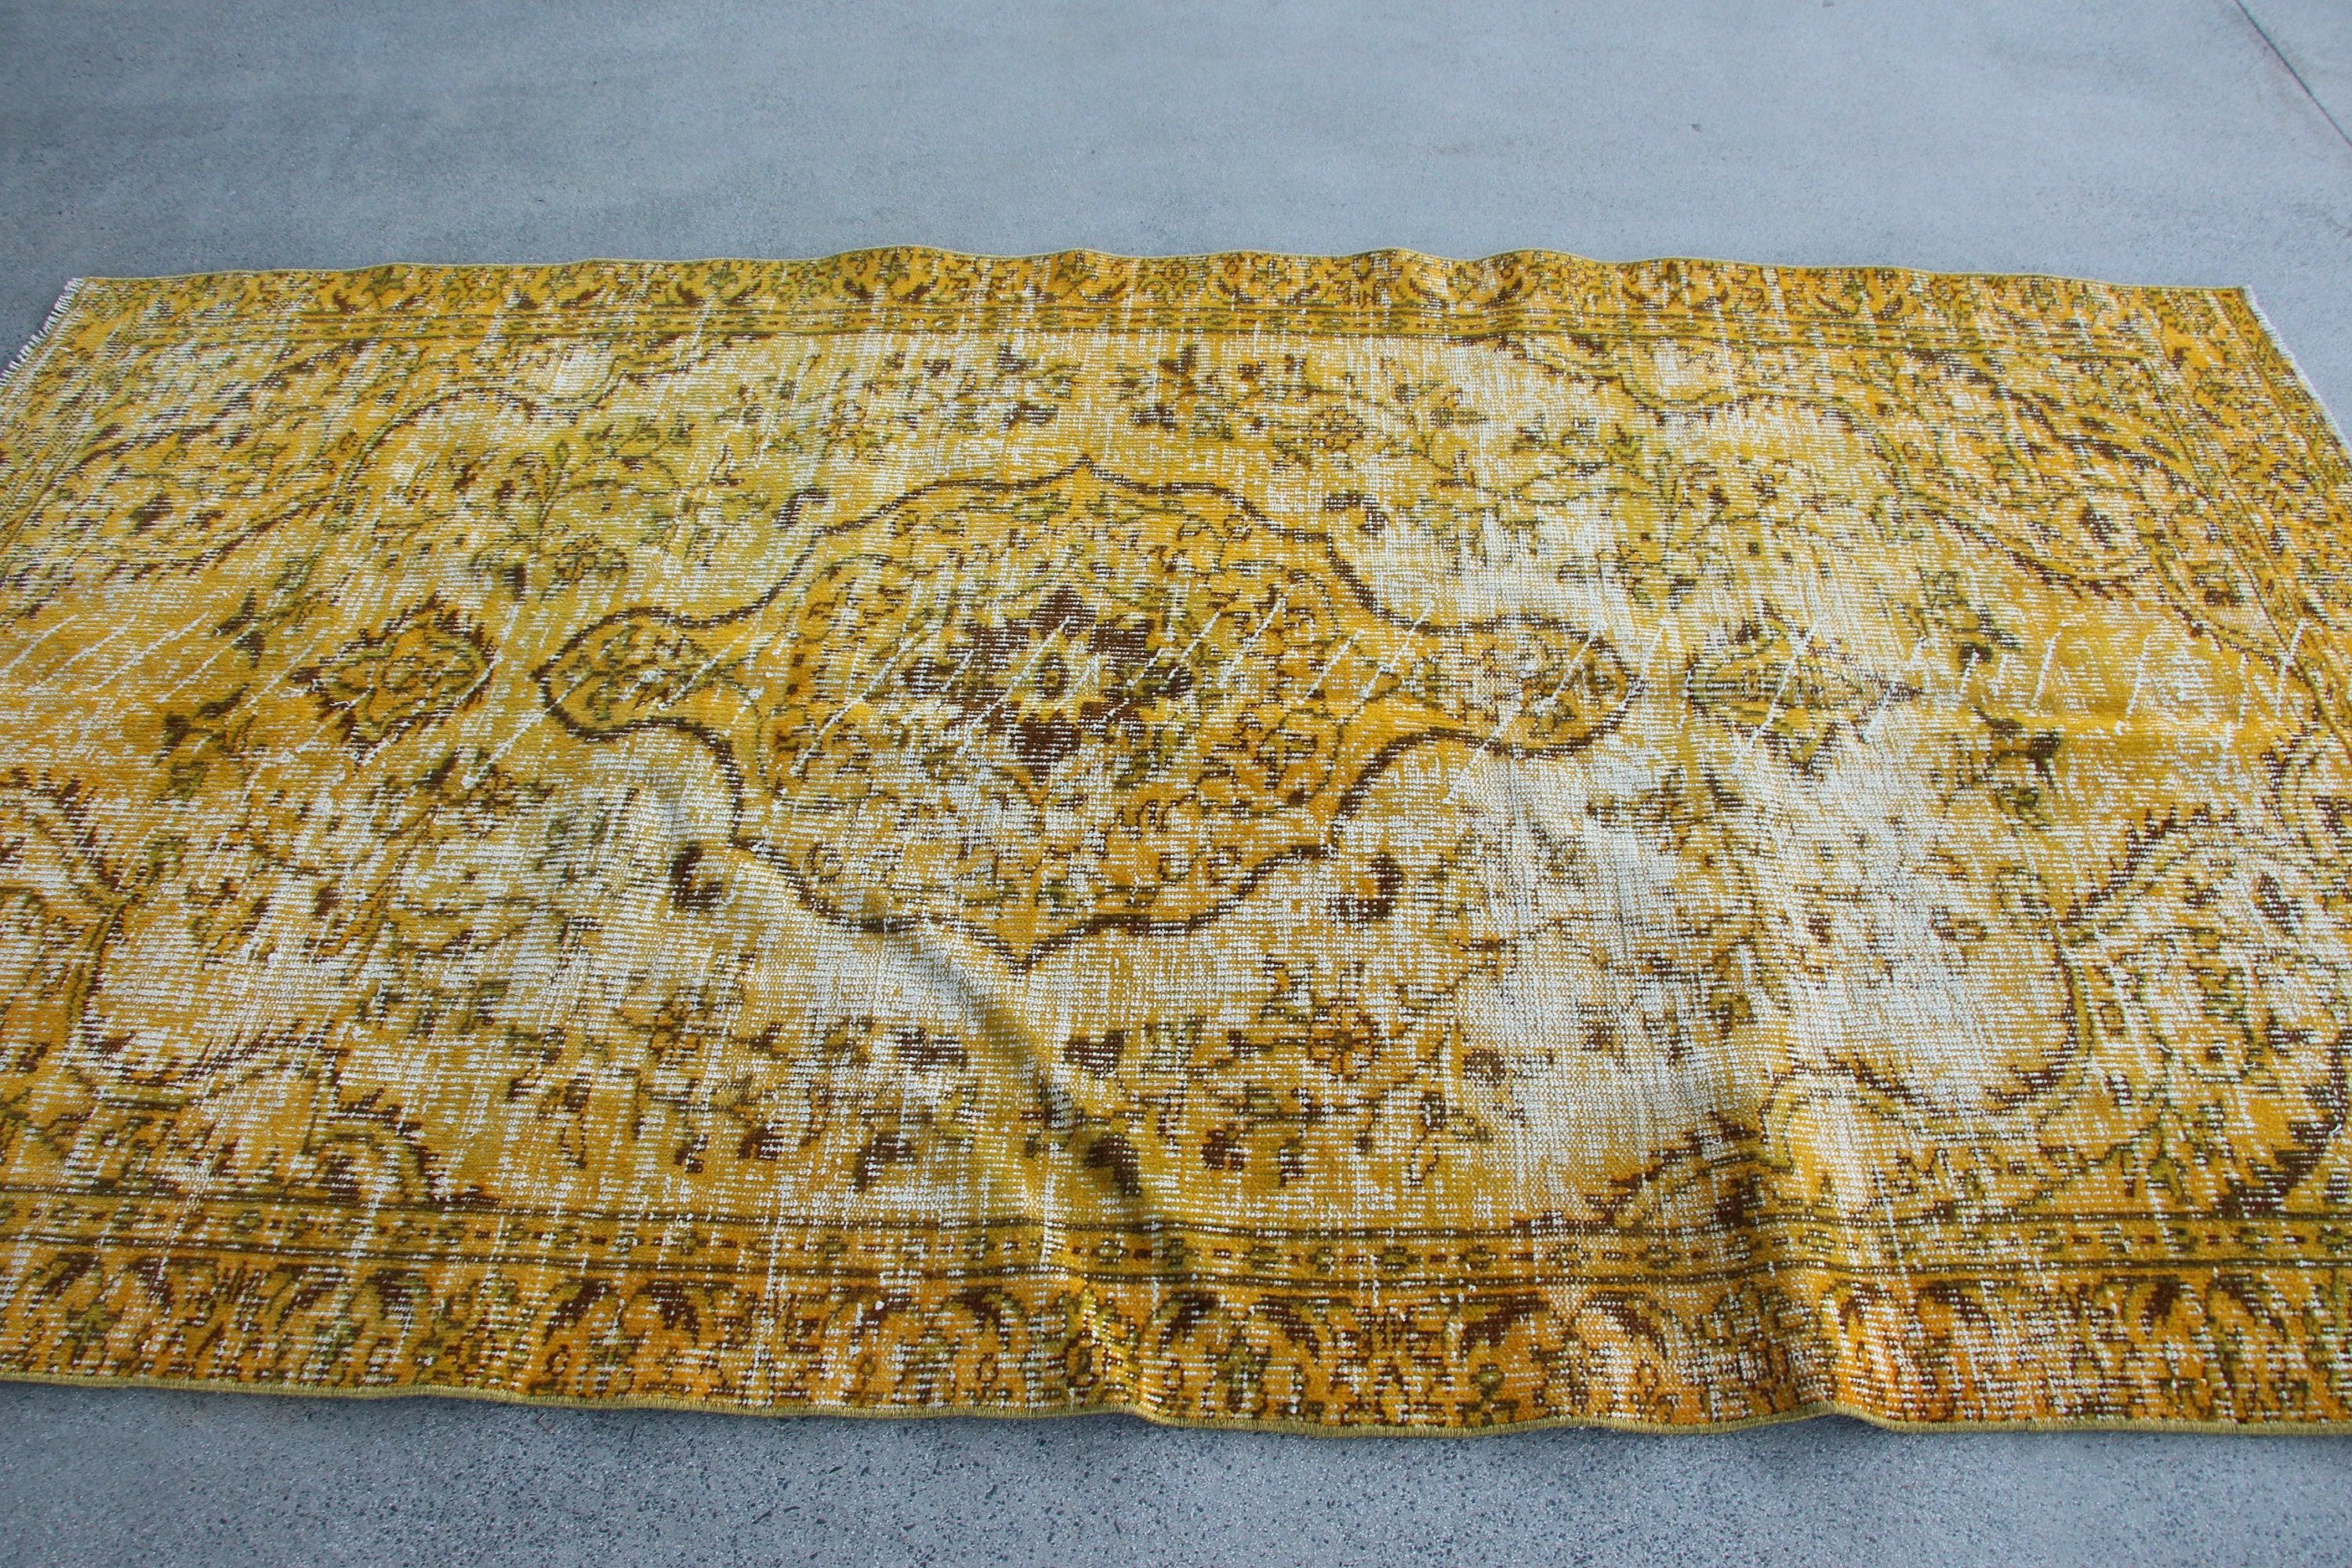 Turkish Rug, Bedroom Rugs, Rugs for Dining Room, Salon Rugs, Vintage Rug, Kitchen Rug, 4.7x8.8 ft Large Rugs, Yellow Anatolian Rugs